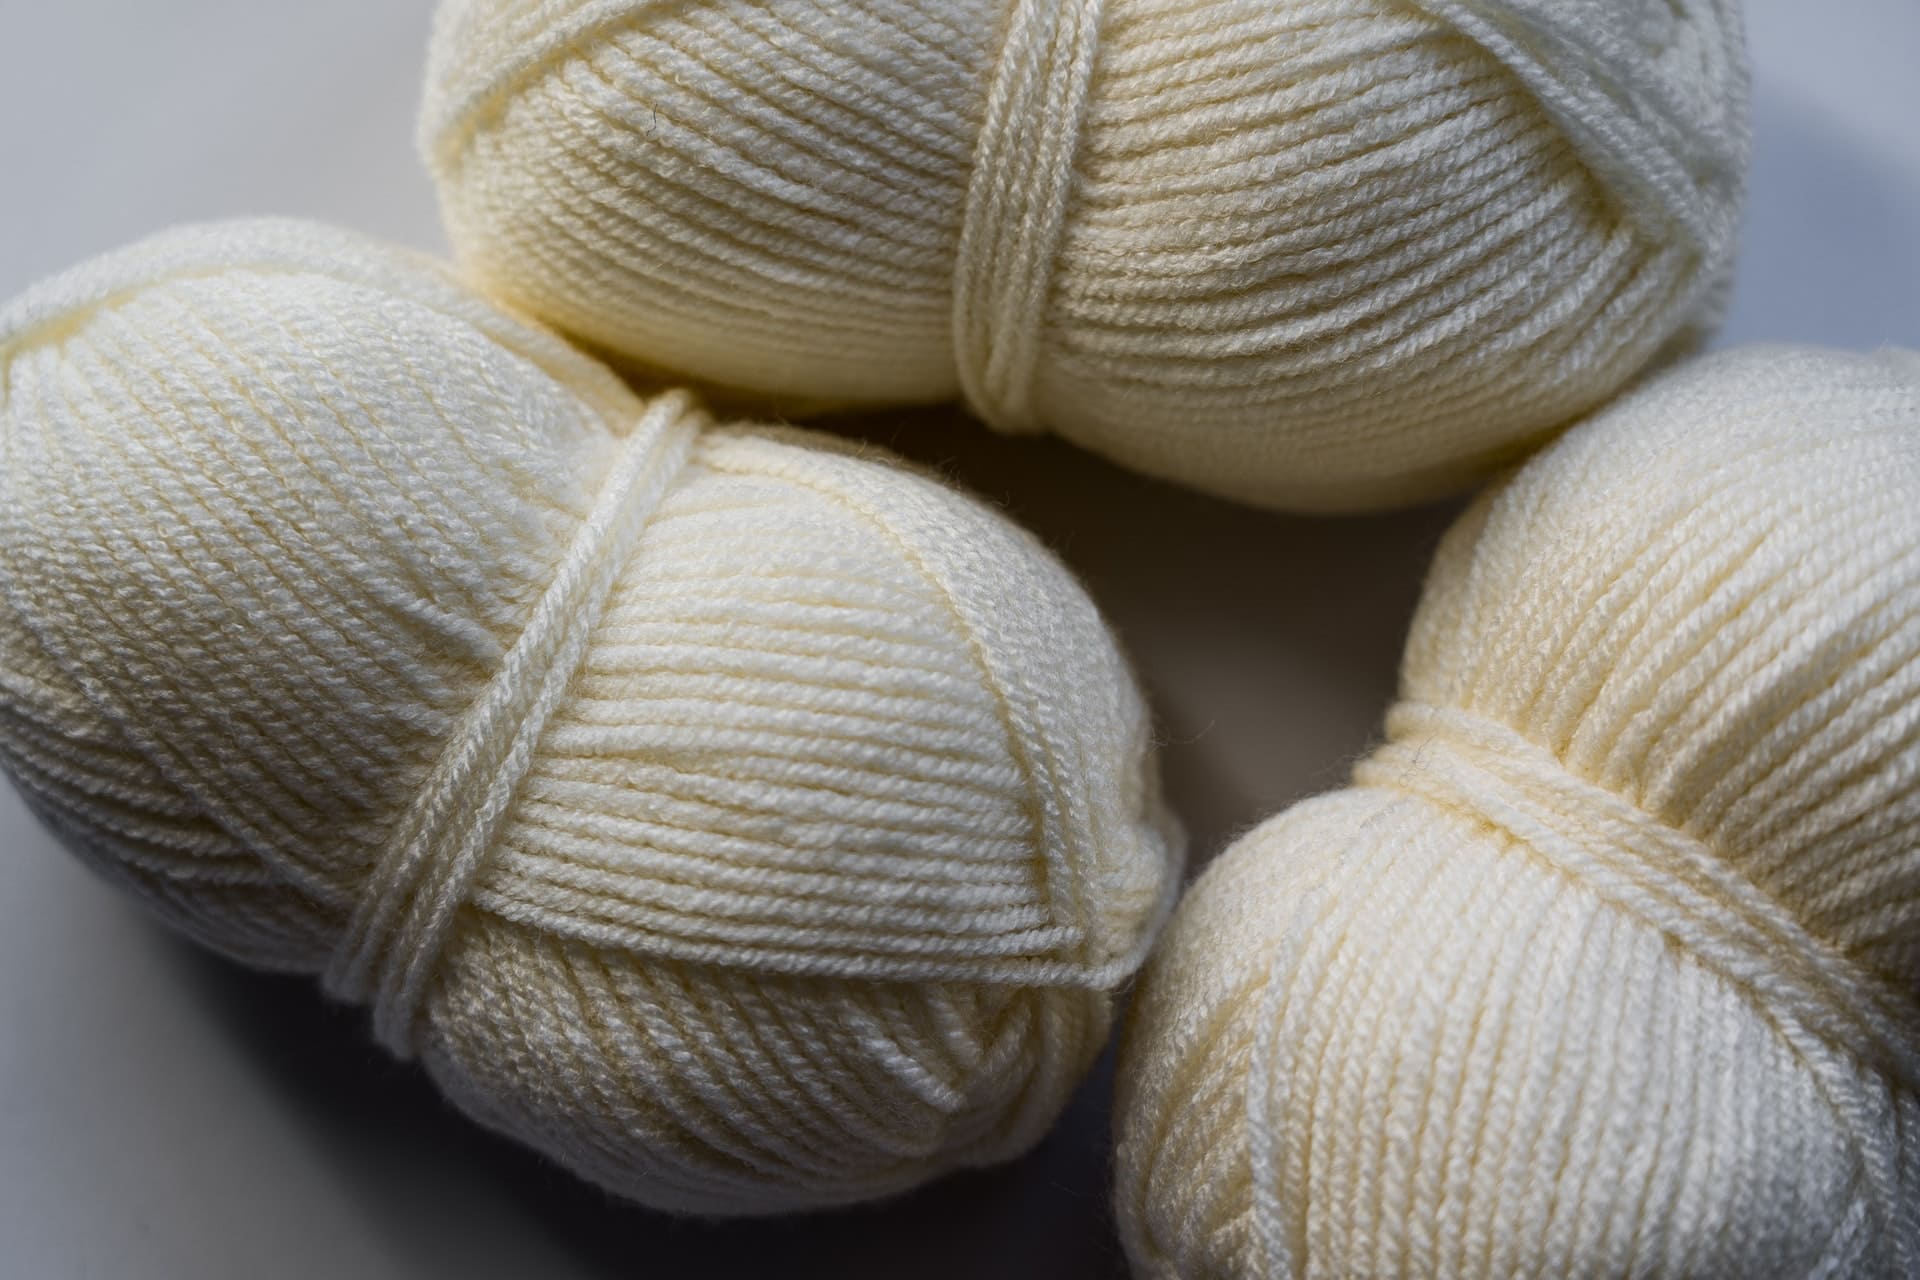 What to crochet with cotton yarn?